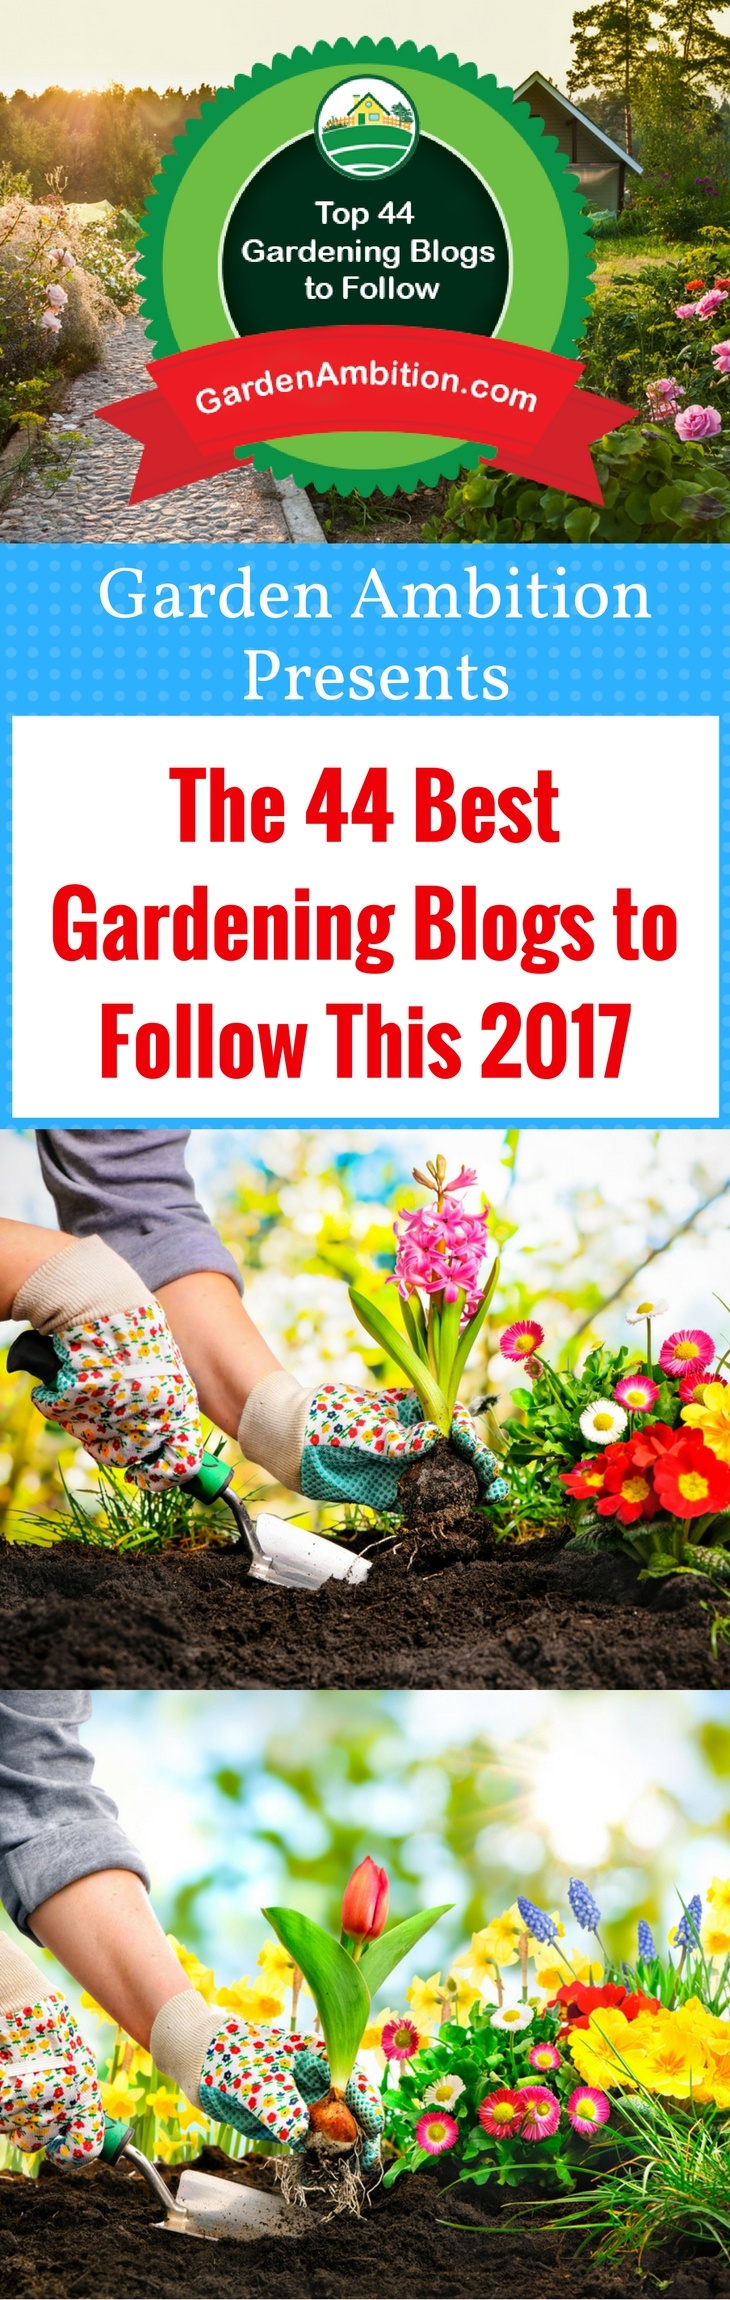 The 44 Best Gardening Blogs To Follow This 2017